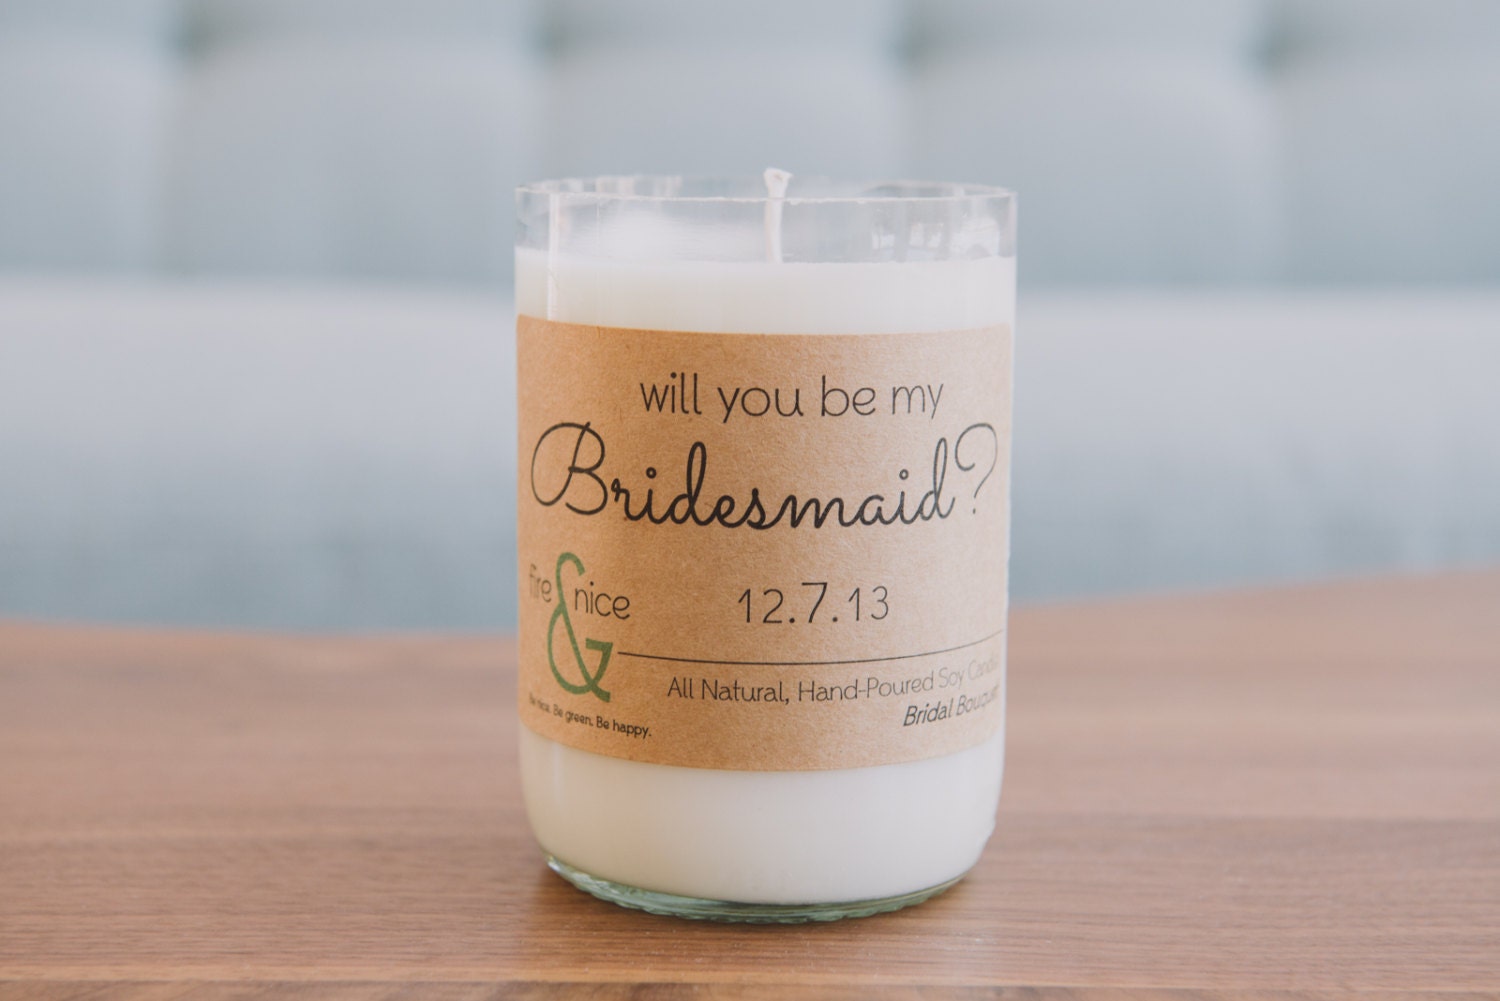 Will You Be My Bridesmaid -Wedding Party Candlegram - Soy Candle - Wine Bottle Candle - Eco-friendly Giftware - Greeting Card